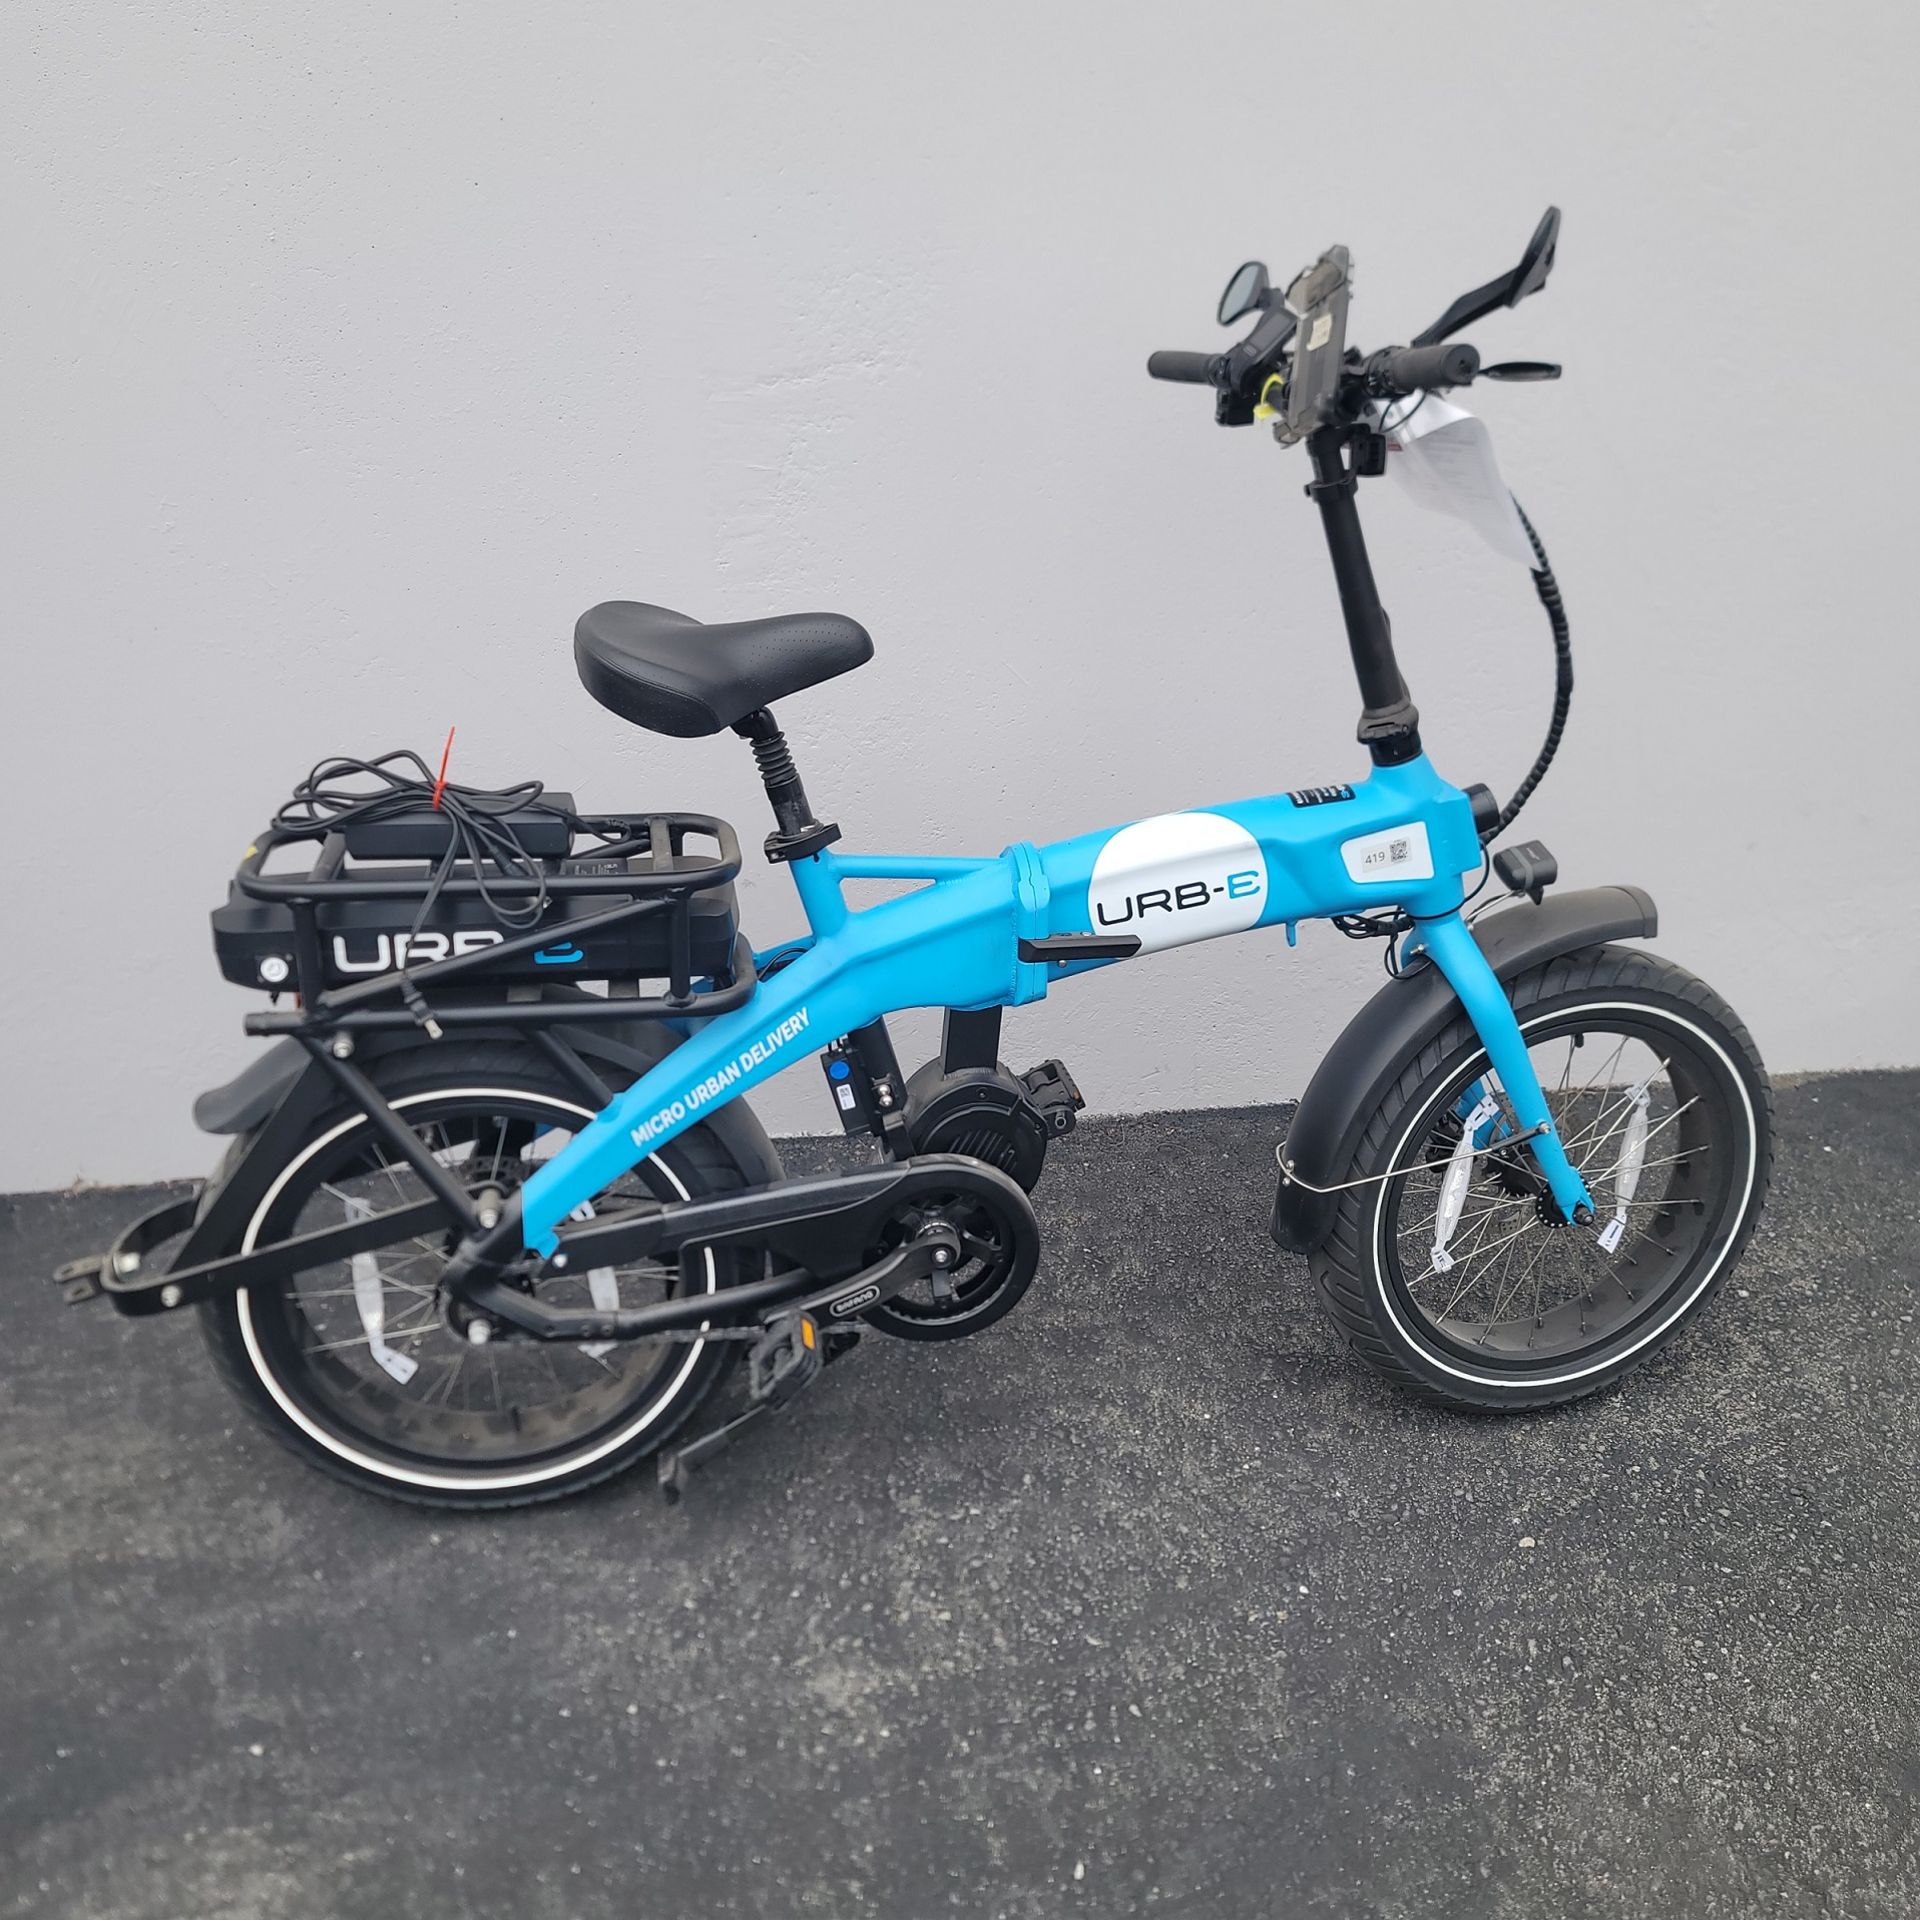 URB-E ELECTRIC DELIVERY BIKE, USED, 750W MID DRIVE MOTOR, SINGLE SPEED, THUMB THROTTLE WITH PEDAL - Image 2 of 4